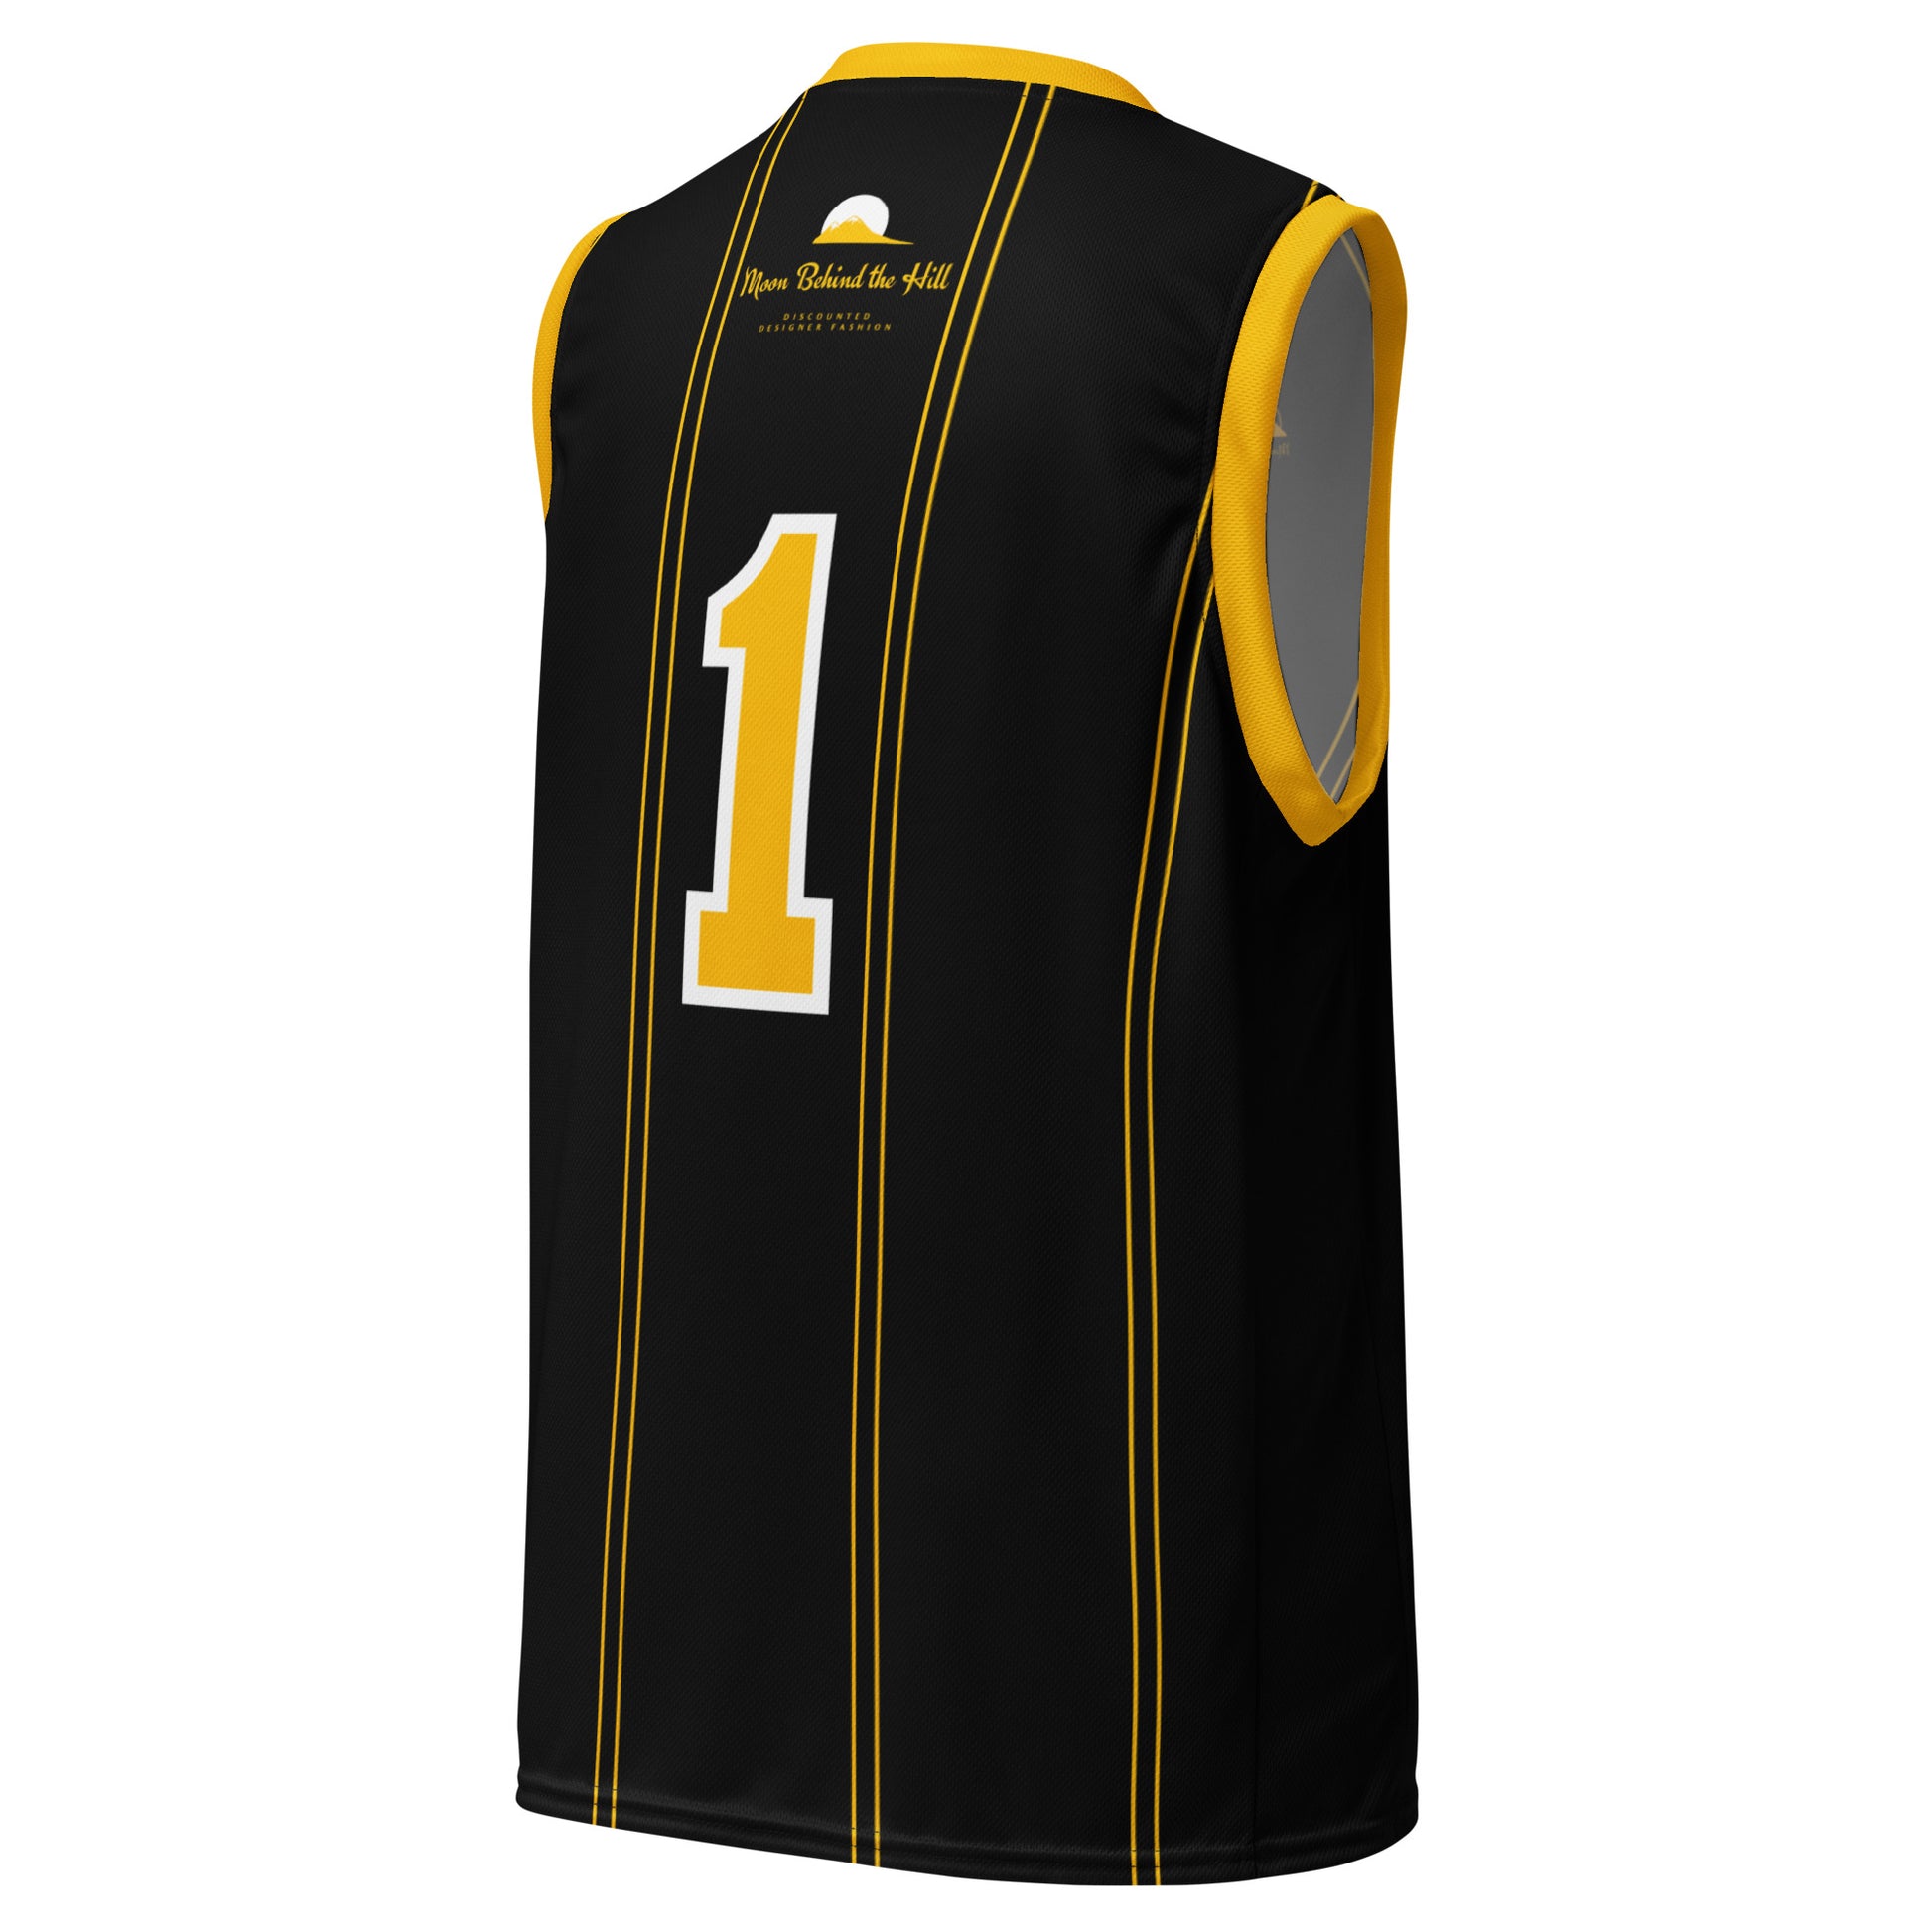 Club Amber #1 Unisex Basketball Jersey 2023 - Designed by Moon Behind The Hill Available to Buy at a Discounted Price on Moon Behind The Hill Online Designer Discount Store